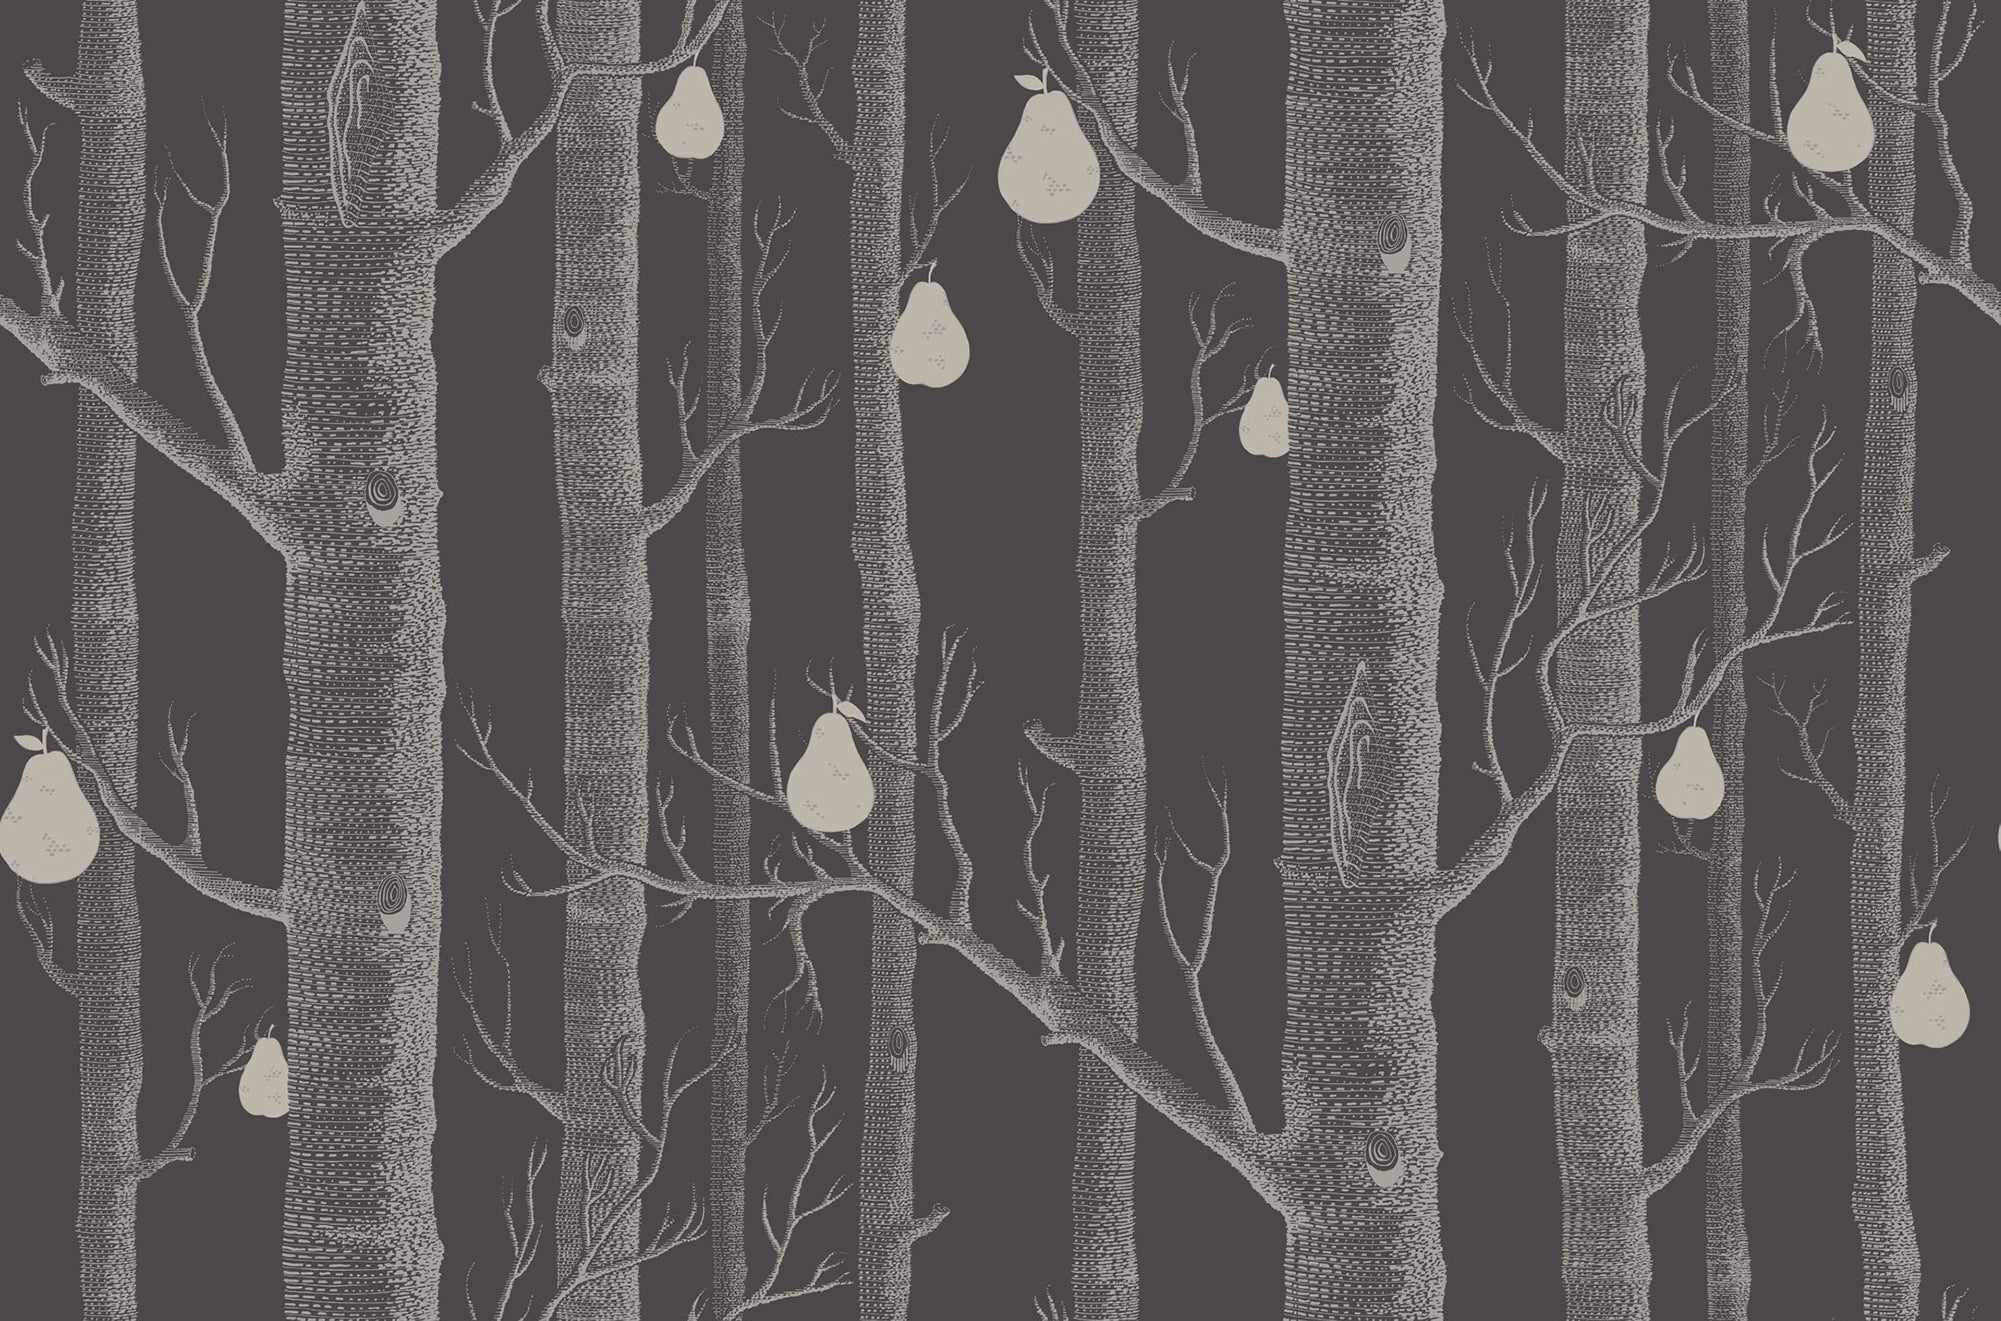 Woods & Pears - White & Silver on Charcoal